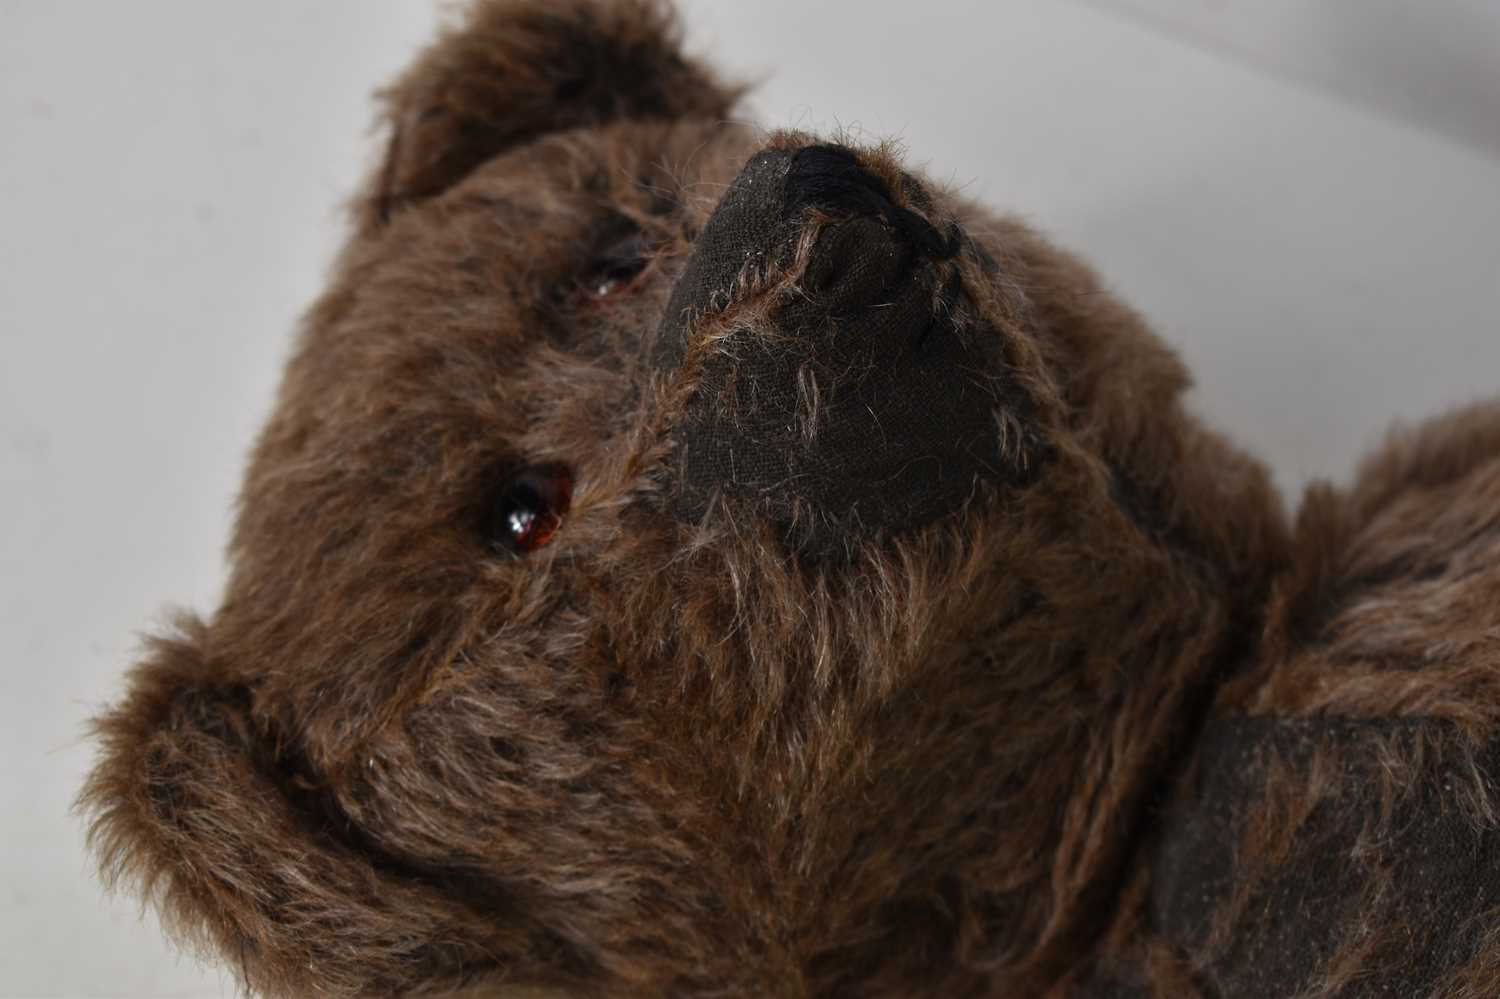 A straw filled teddy bear, in the style of Steiff, brown mohair body, swivel head and jointed at - Image 6 of 6